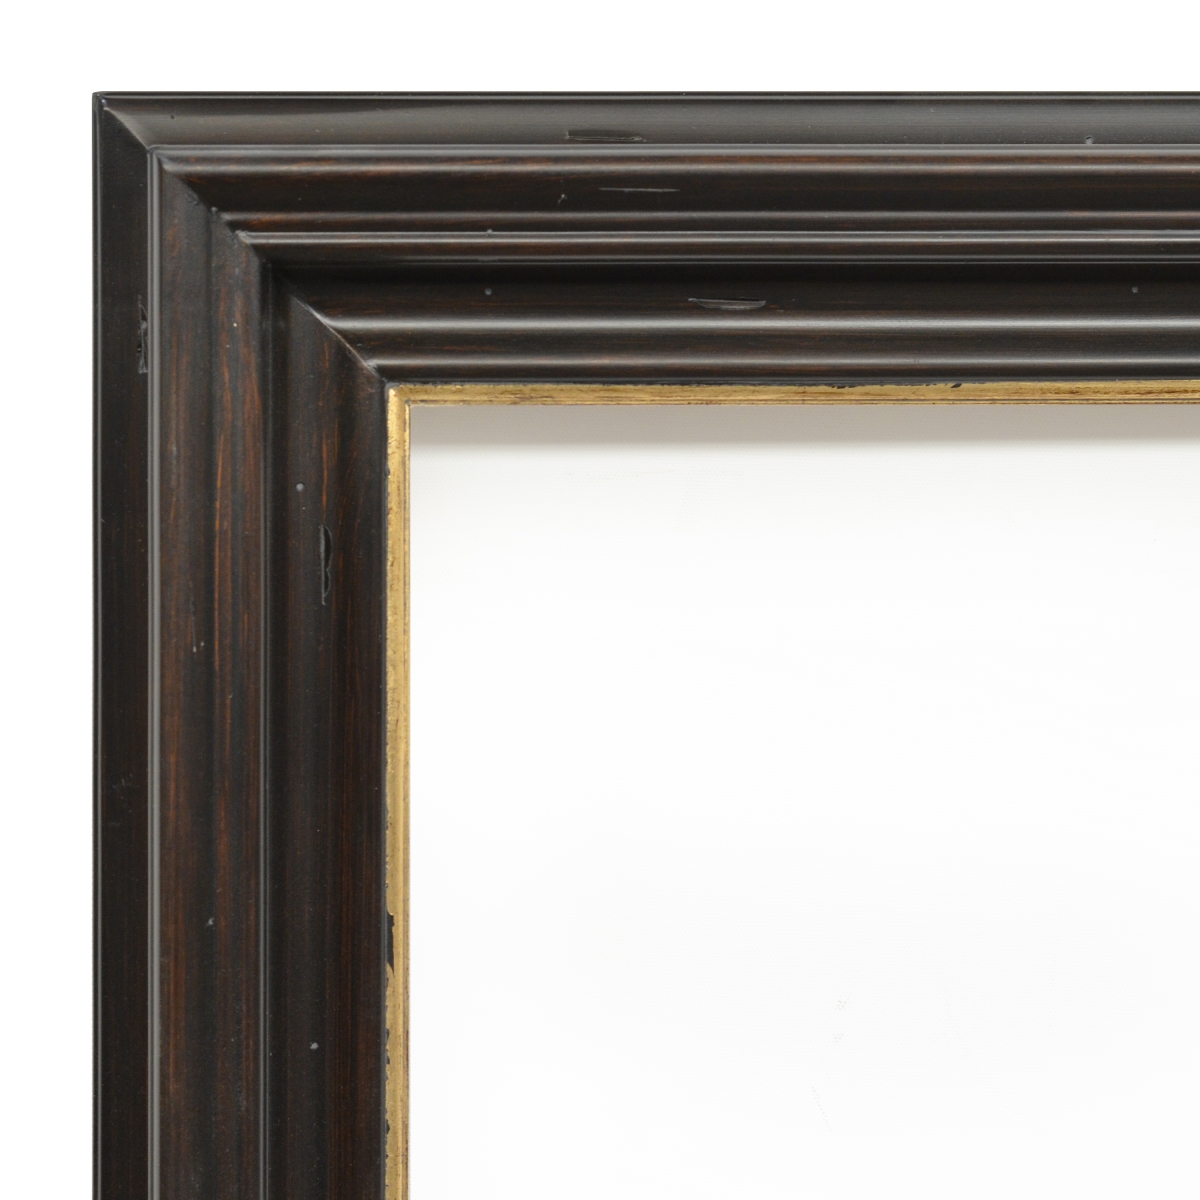 12008358 36 X 48 In. Open Woods Frame - Burnished Cherry